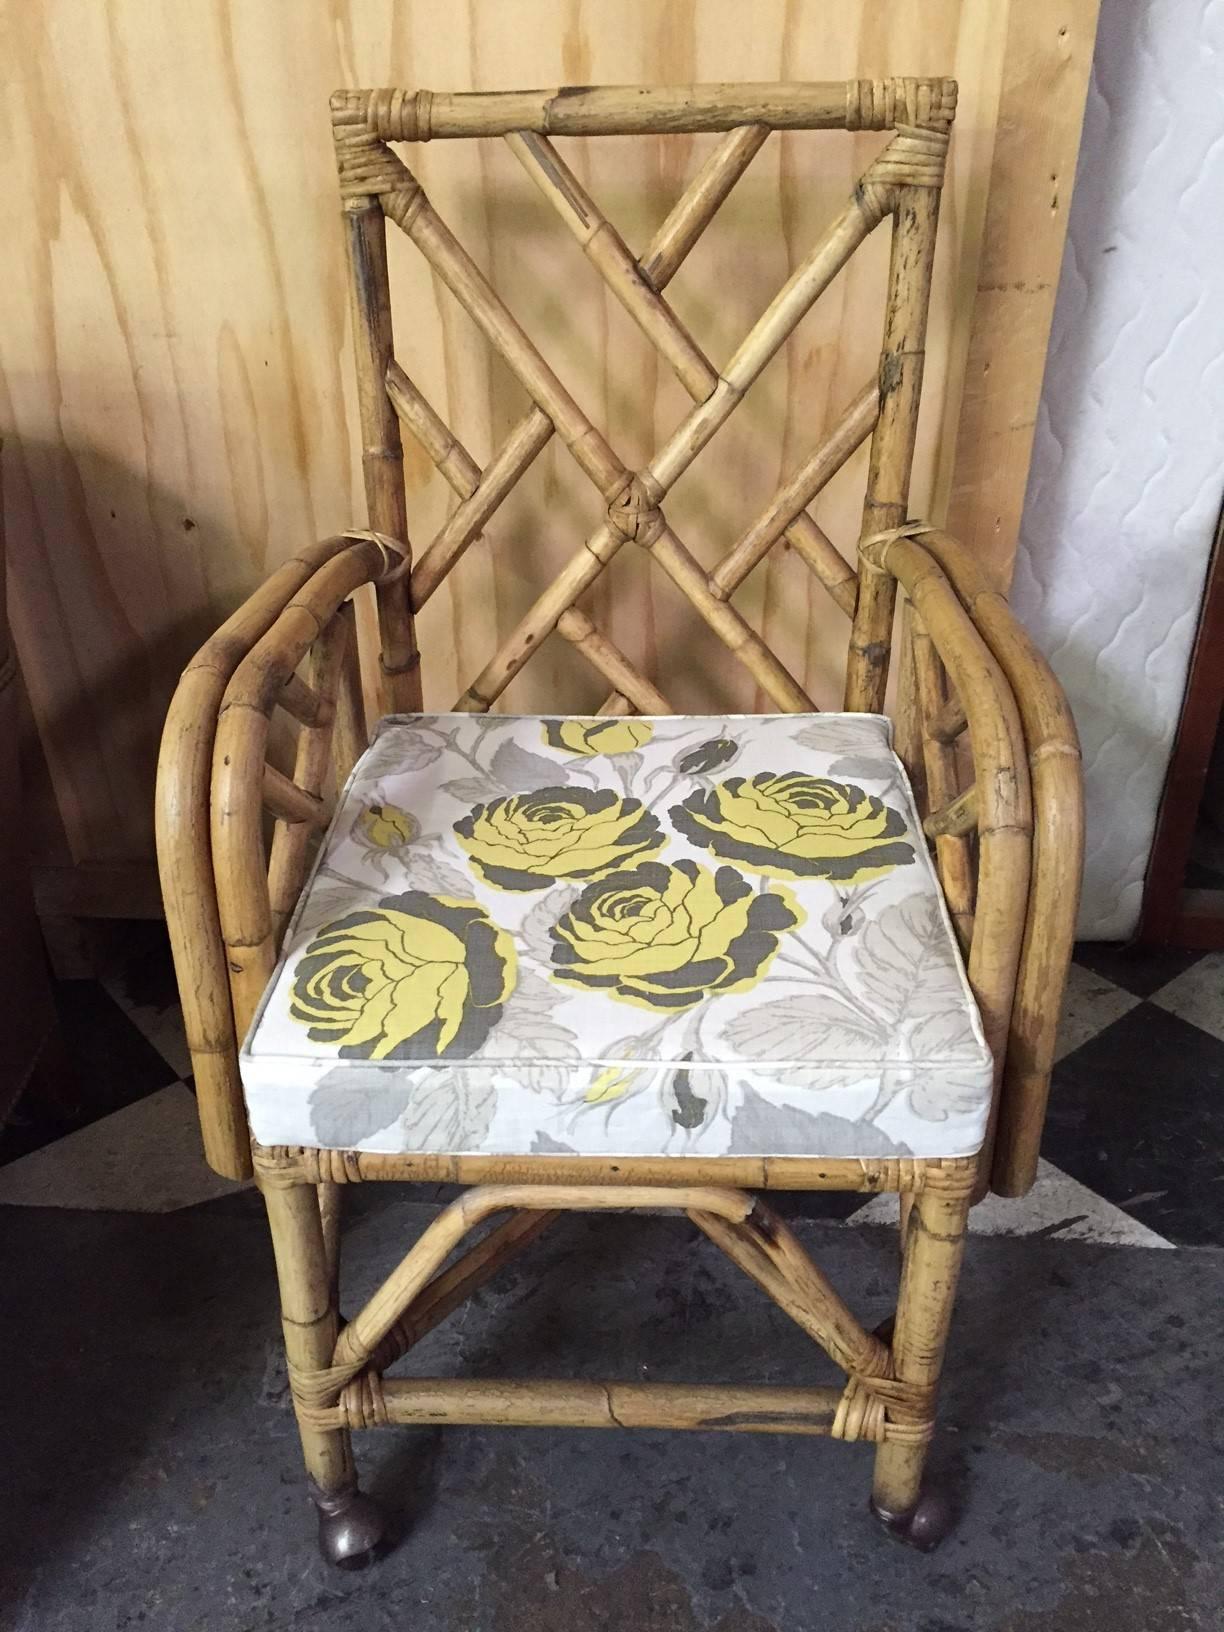 Bamboo chair reupholstered with Christopher Farr fabric.
Measures: 22.5